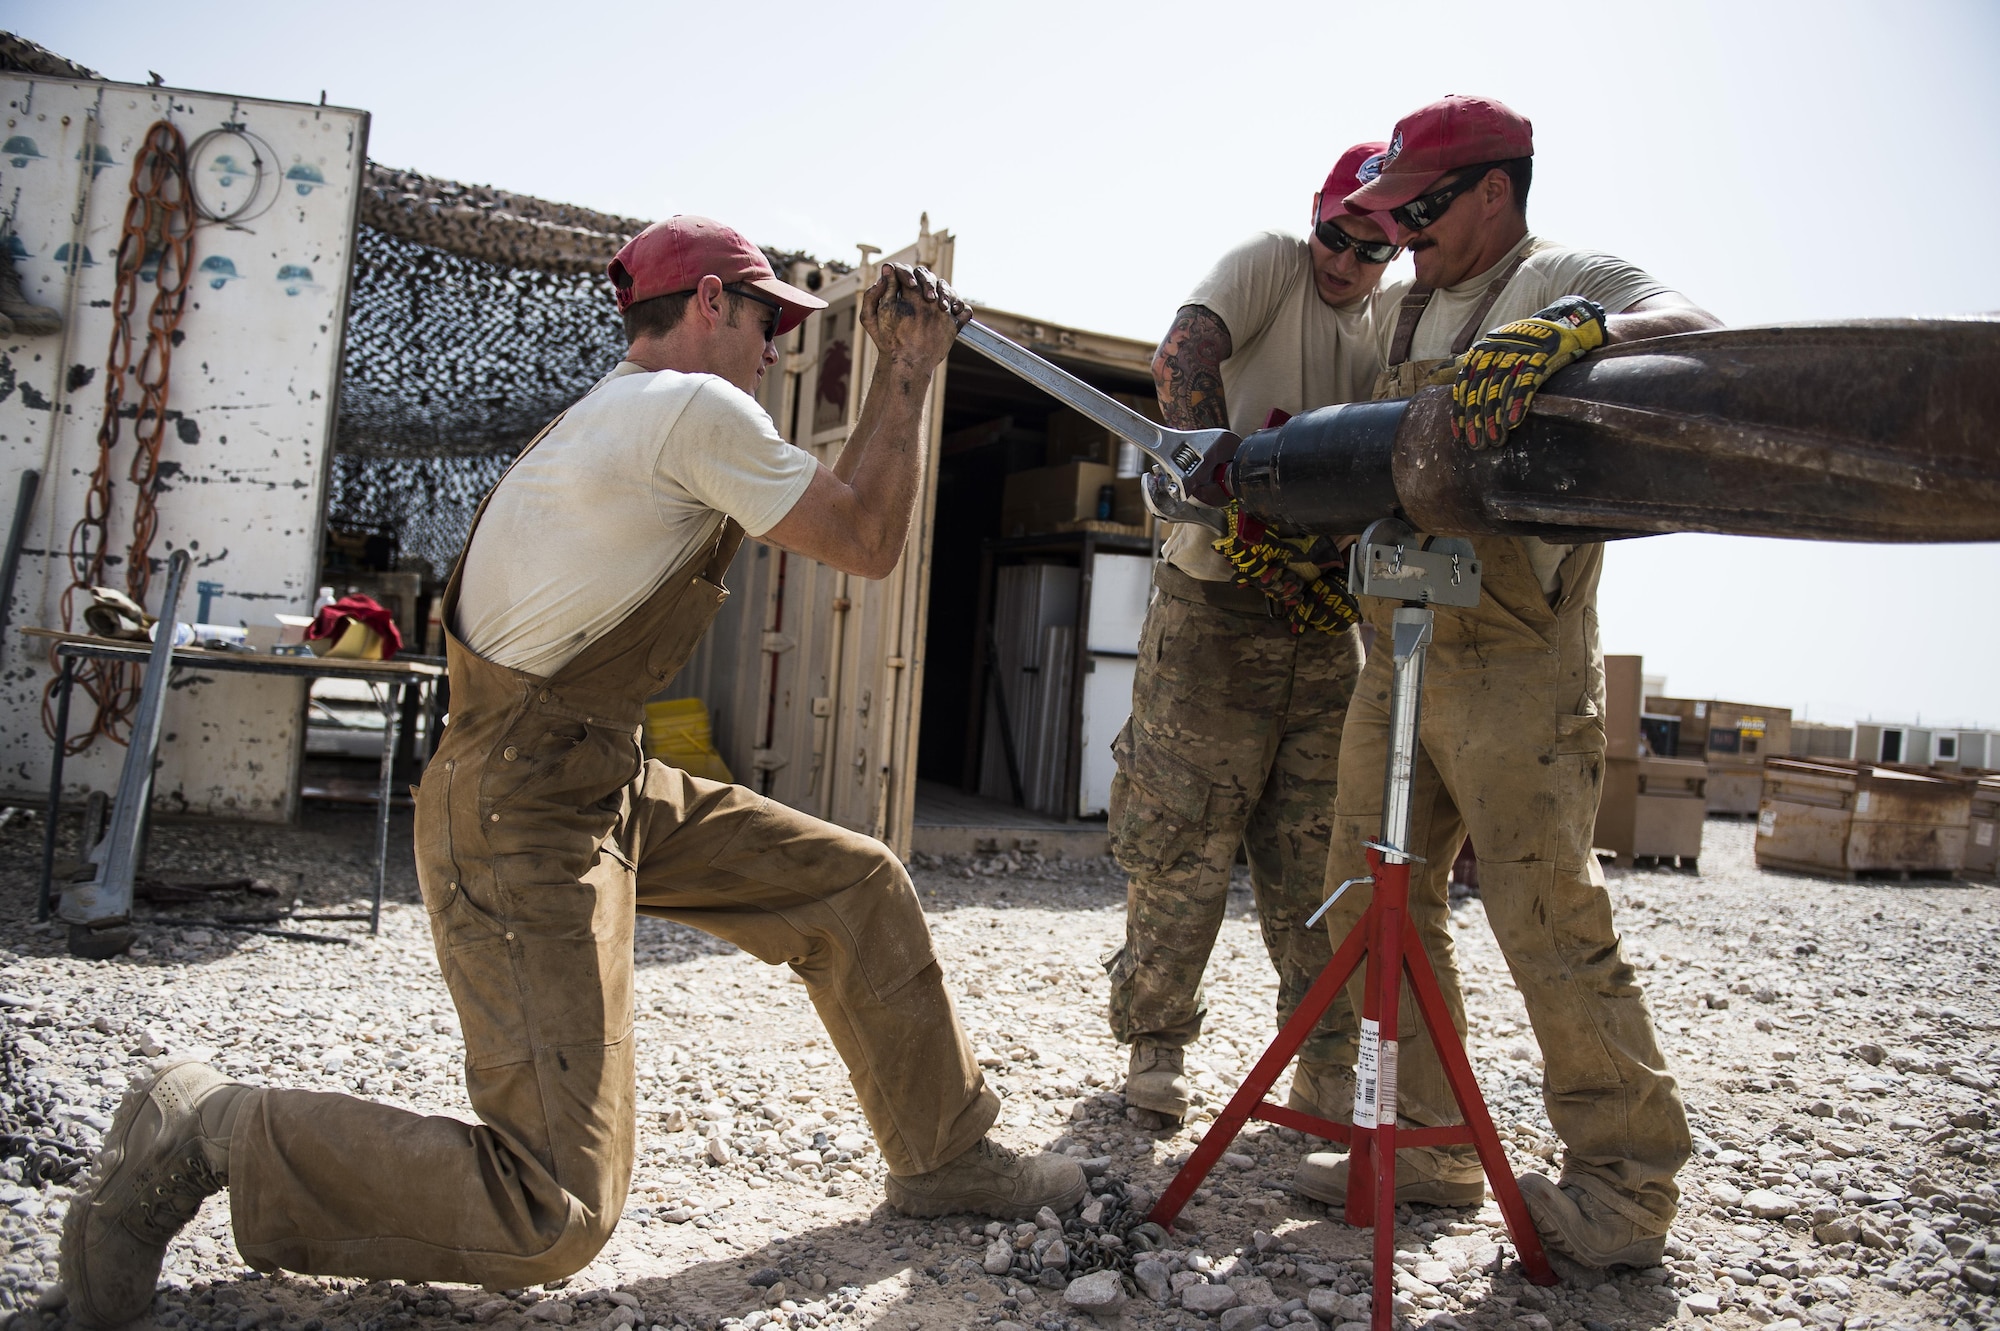 Tech. Sgt. Randy Blount (left), a well drilling technician assigned to the 557th Expeditionary Red Horse Squadron, loosens  a rod on a piece of well drilling equipment at Al Taqaddum Air Base, Iraq, June 5, 2016. The 557th ERHS well drilling team are obtaining an organic water source for Al Taqaddum. Red Horse is helping to improve Iraq's infrastructure in support of the Government of Iraq.
(U.S. Air Force photo/Staff Sgt. Larry E. Reid Jr., Released)